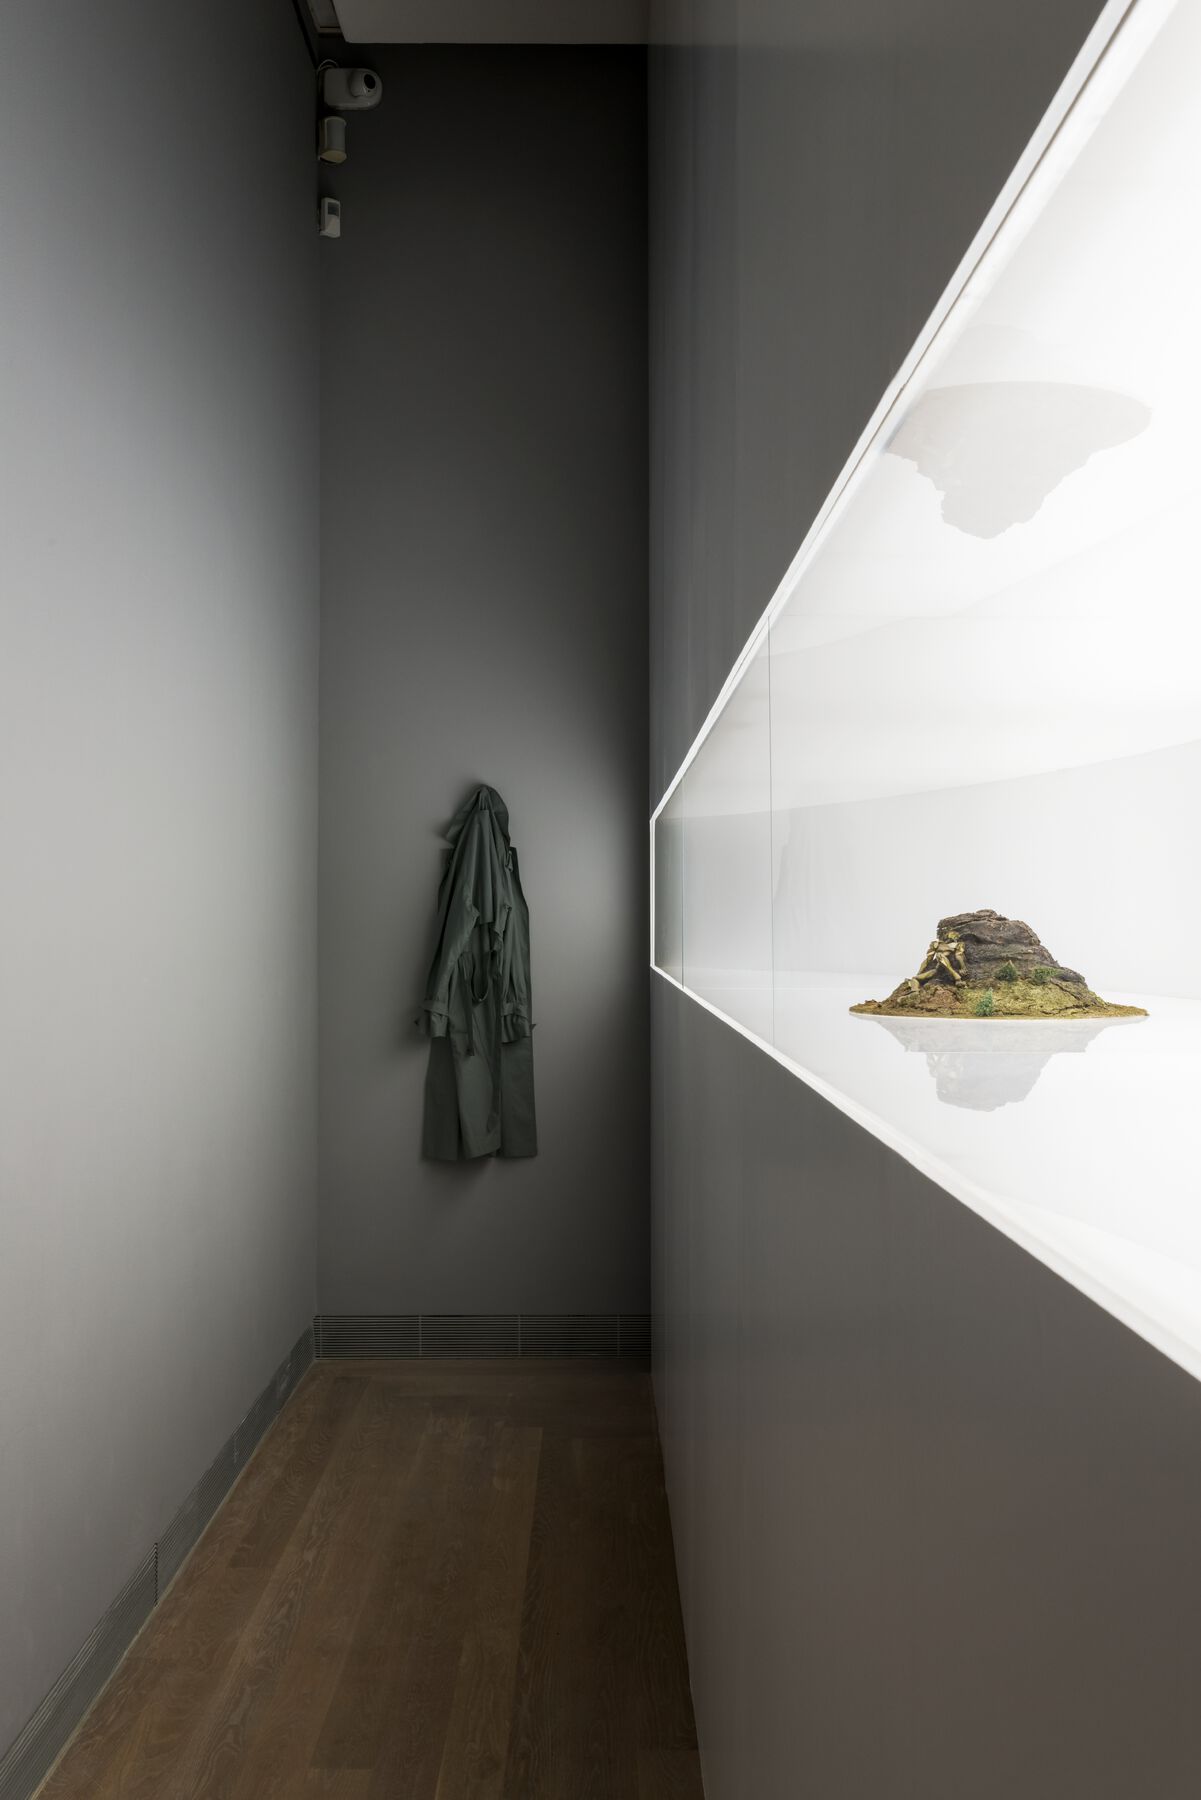 Model inside illuminated glass case in right wall of narrow, dark hallway; at hallway’s end is a hanging coat